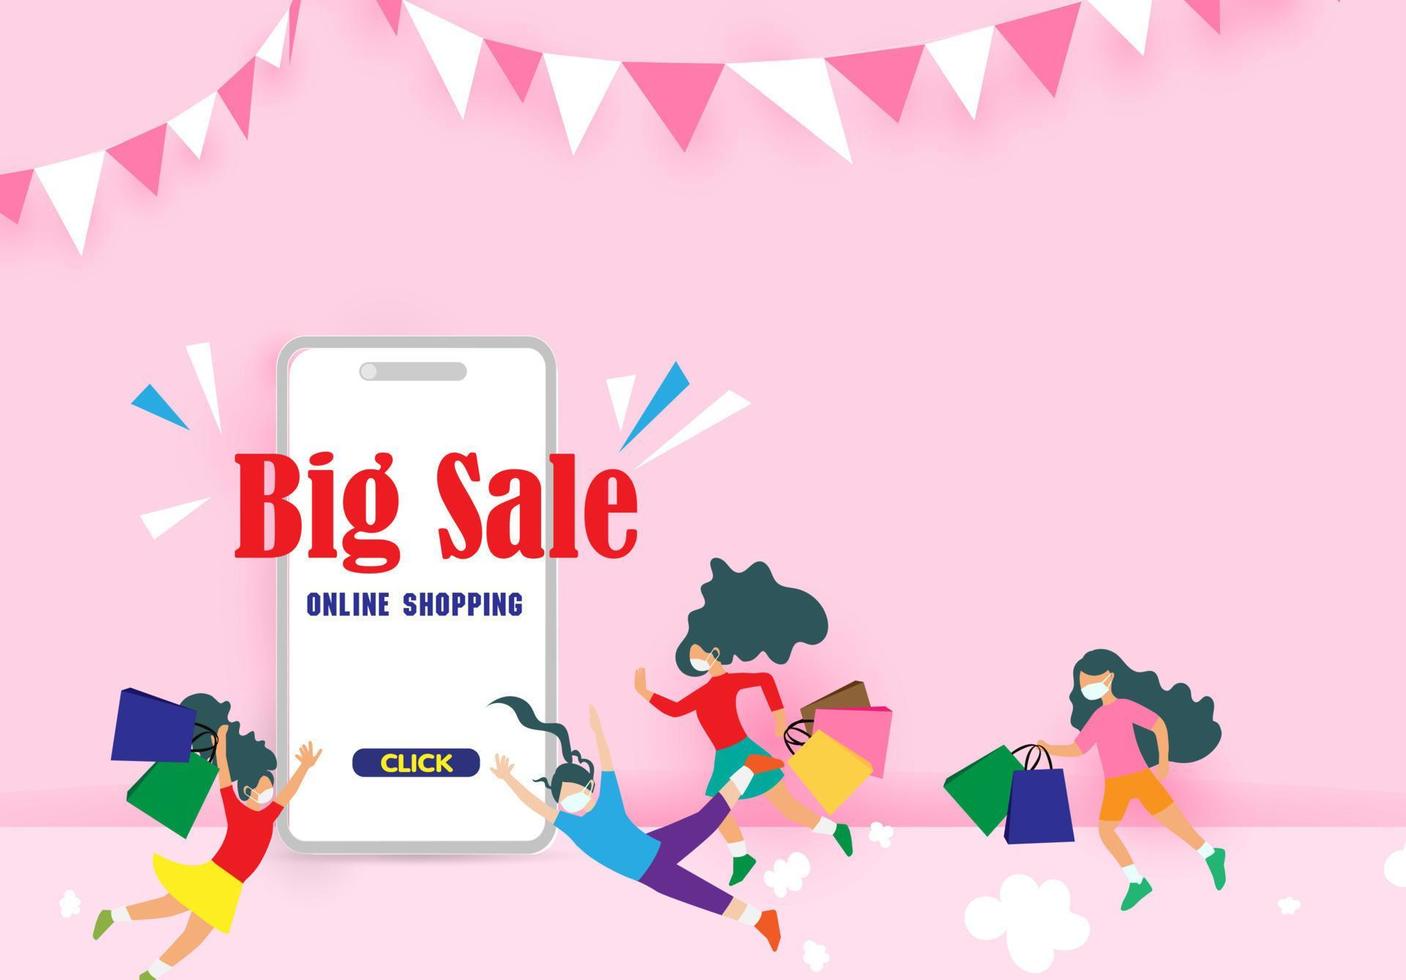 Sale promotion with text BIG SALE and happy ethnic girl on mobile phone design for banner sale with lovely women running go to shopping in abstract background and colorful shirt. Vector illustration